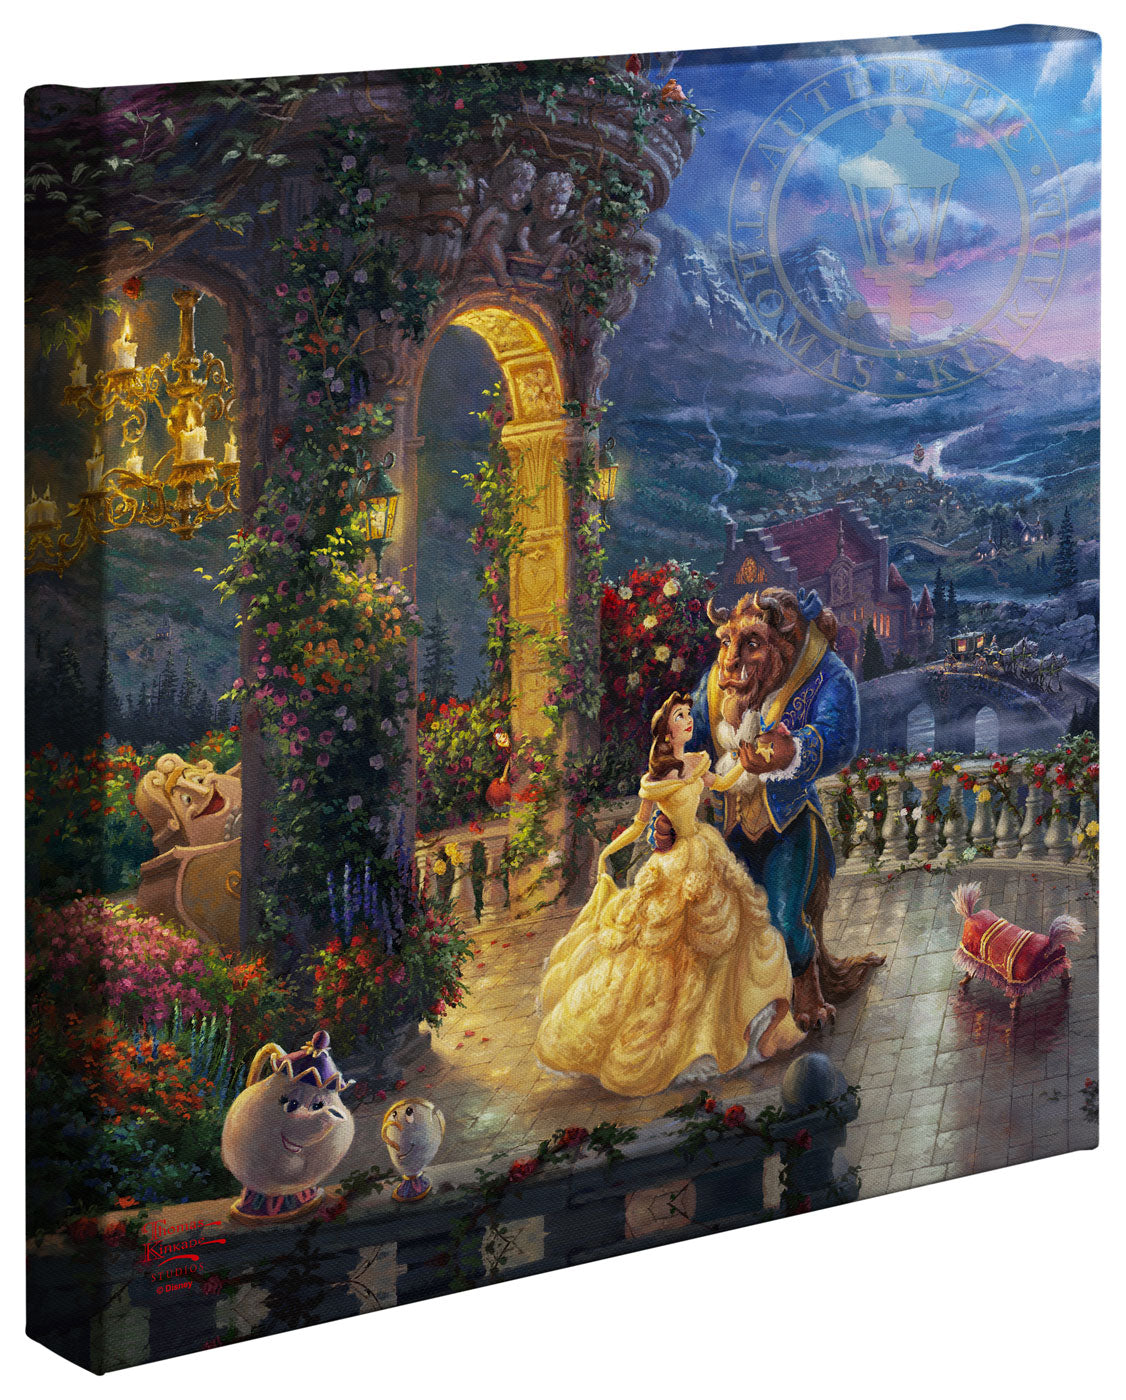 Beauty and the Beast Dancing in the Moonlight - 14" x14" Gallery Wrapped Canvas